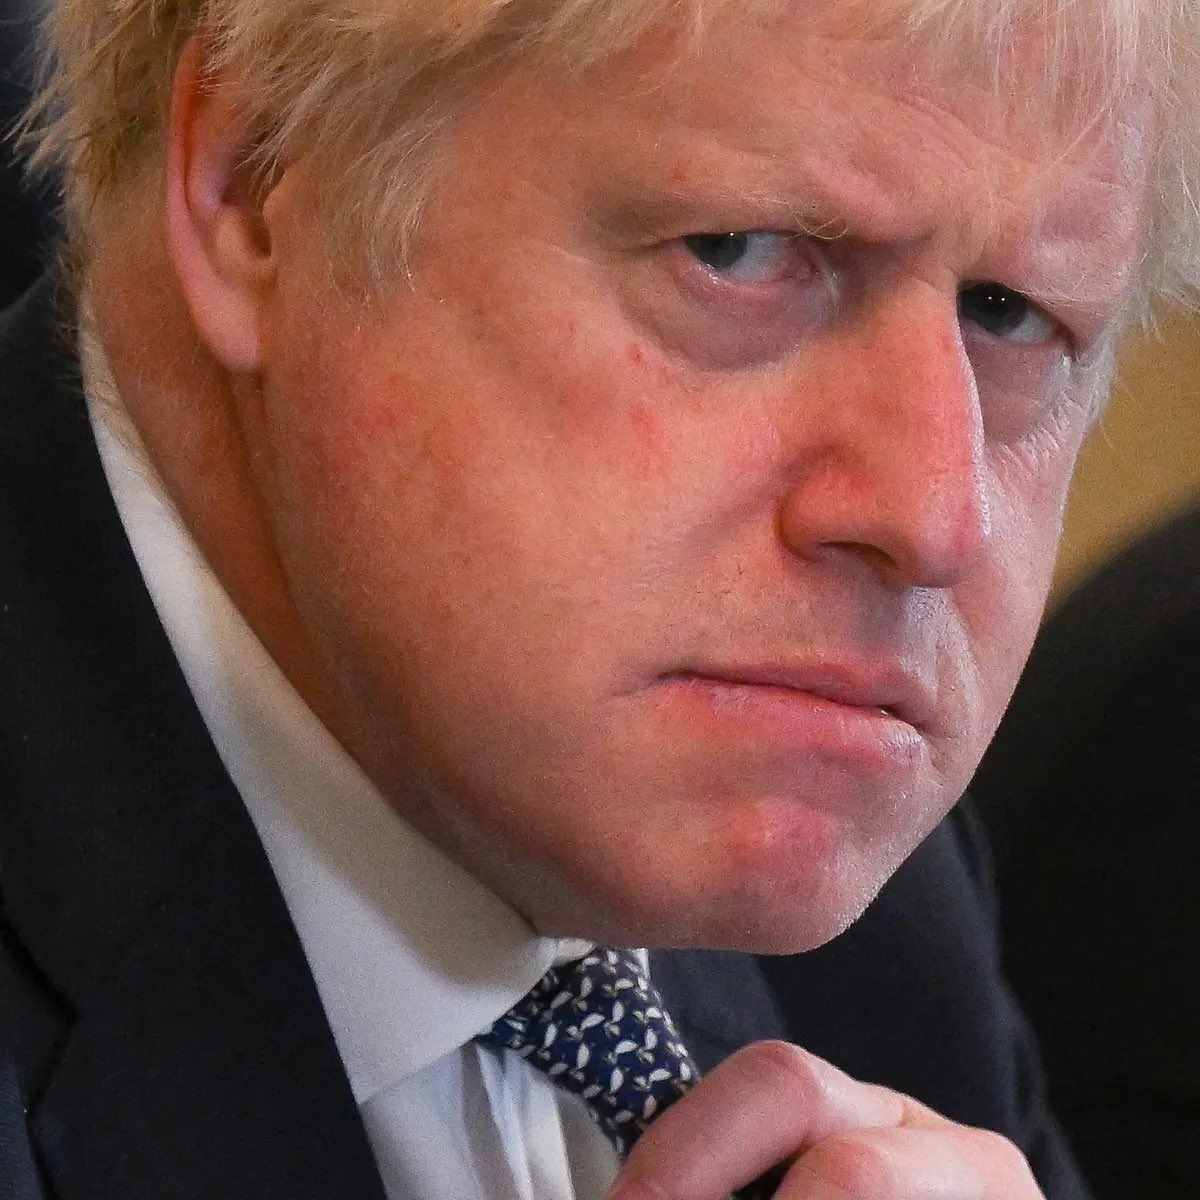 Has this fat, scruffy, racist piece of shit handed his phone in yet? If not, arrest the cunt! #BorisJohnsonContemptOfCourt #BorisLiedPeopleDied